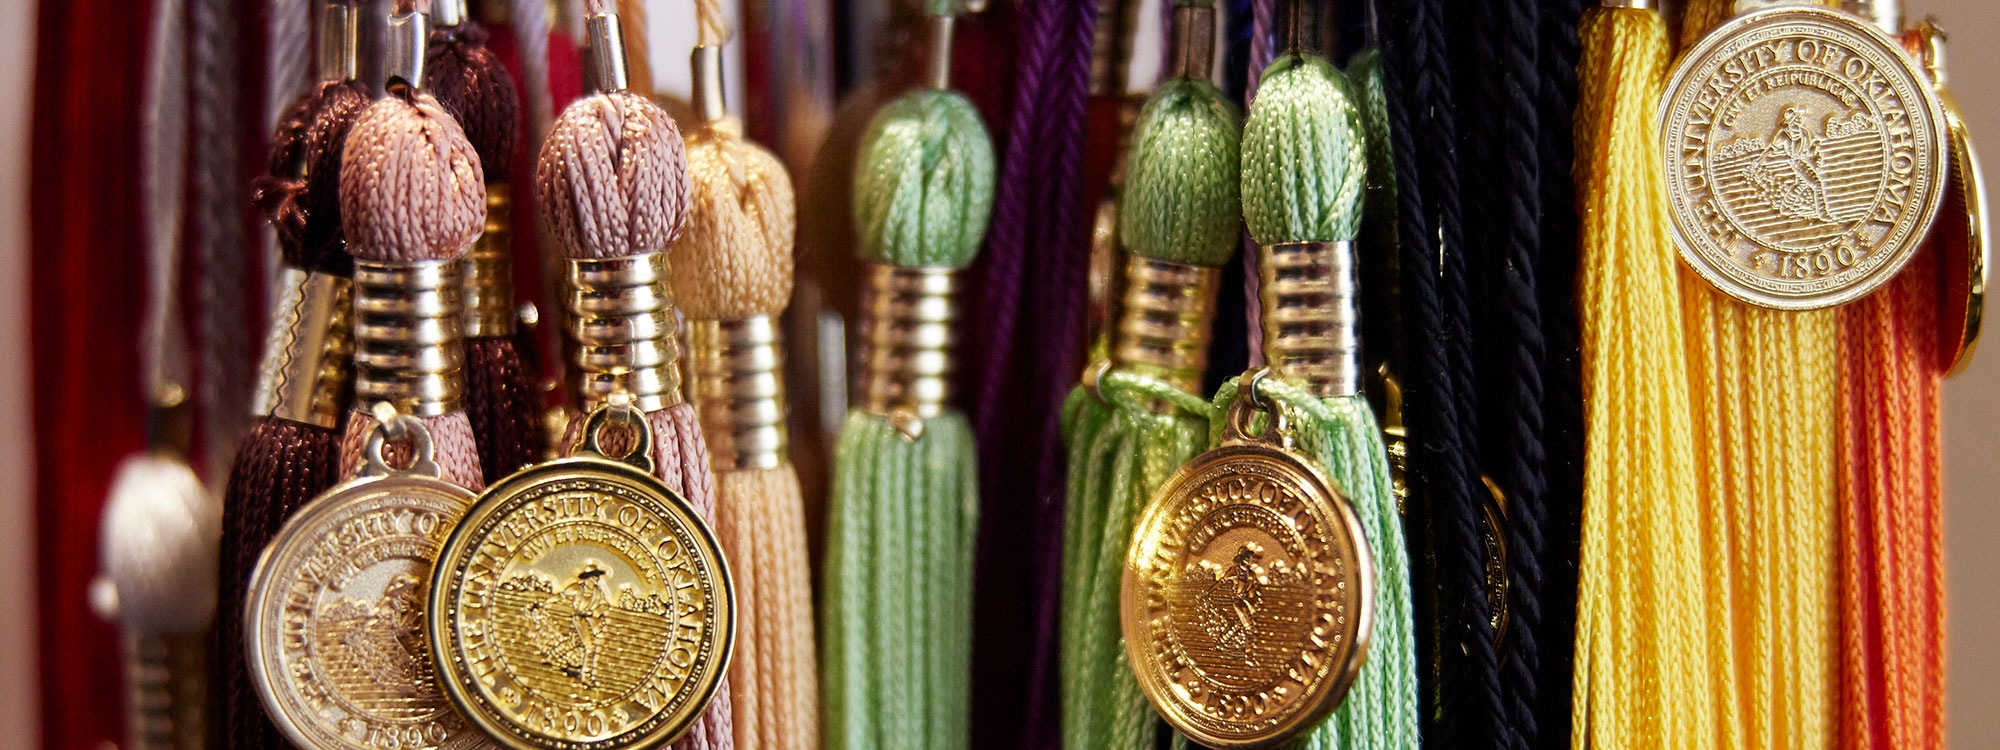 OU tassels in a rainbow of colors, featuring a coin imprinted with the OU seal.